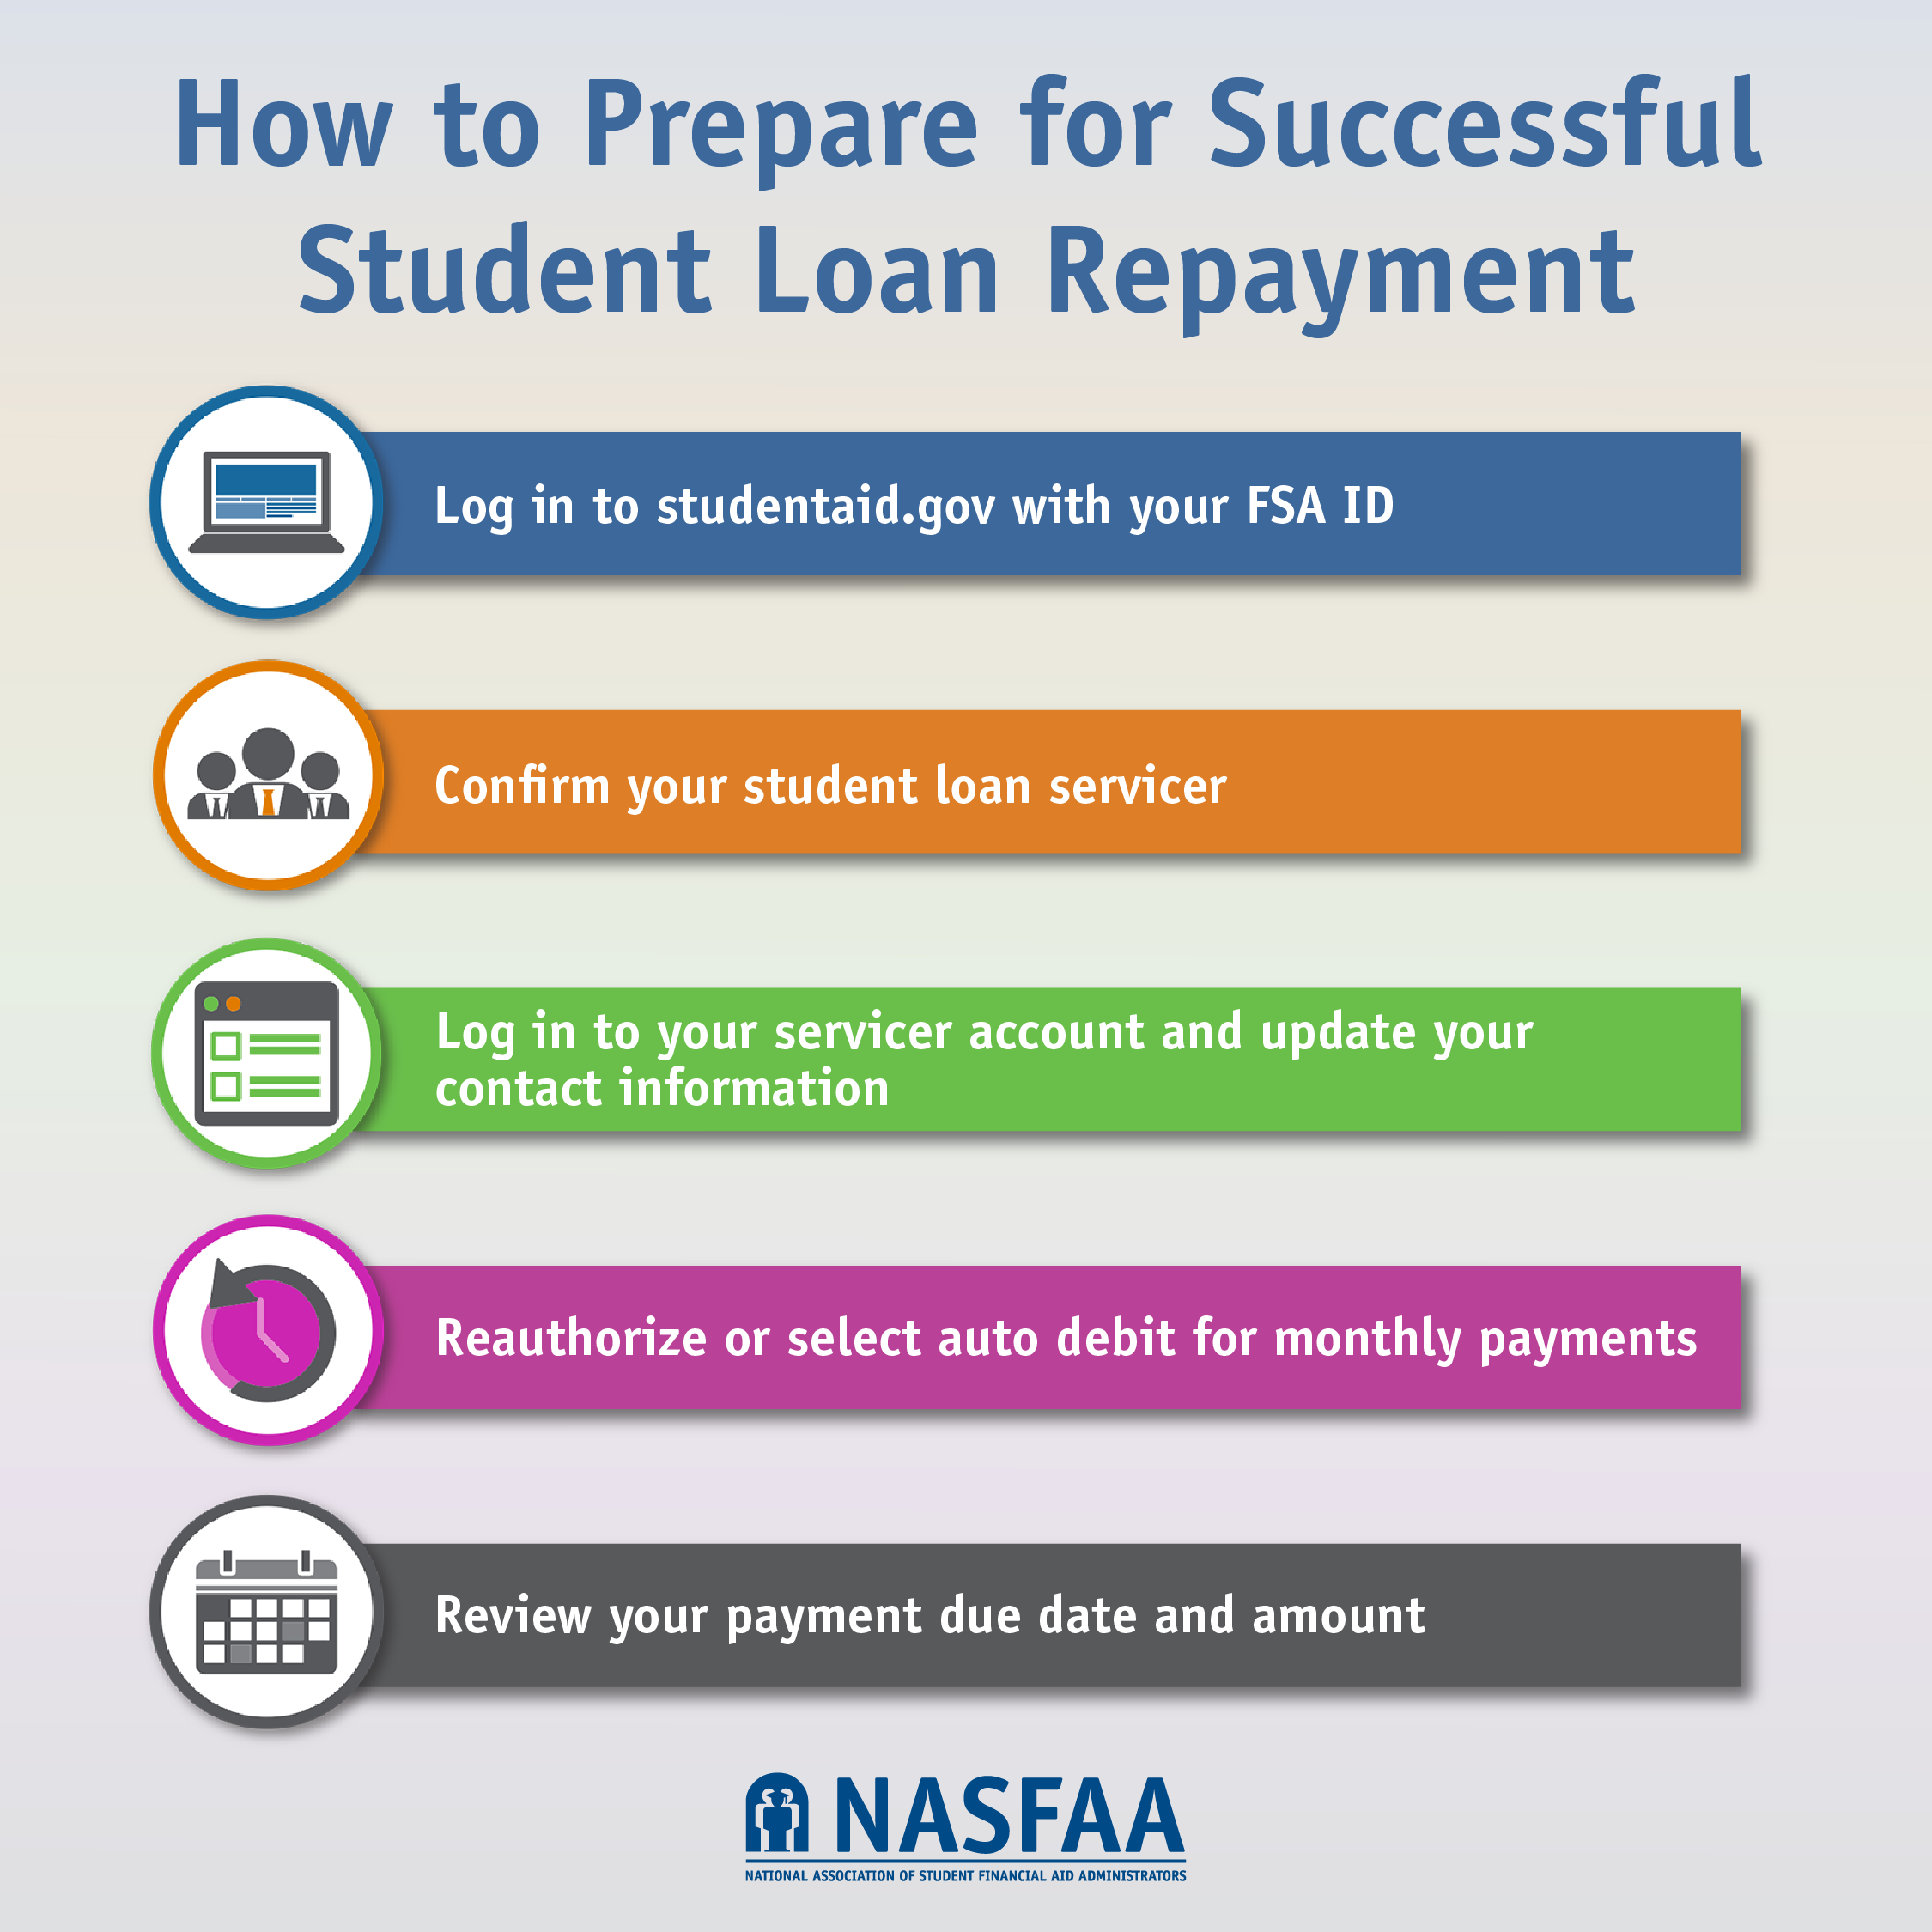 How to Prepare for Successful Repayment